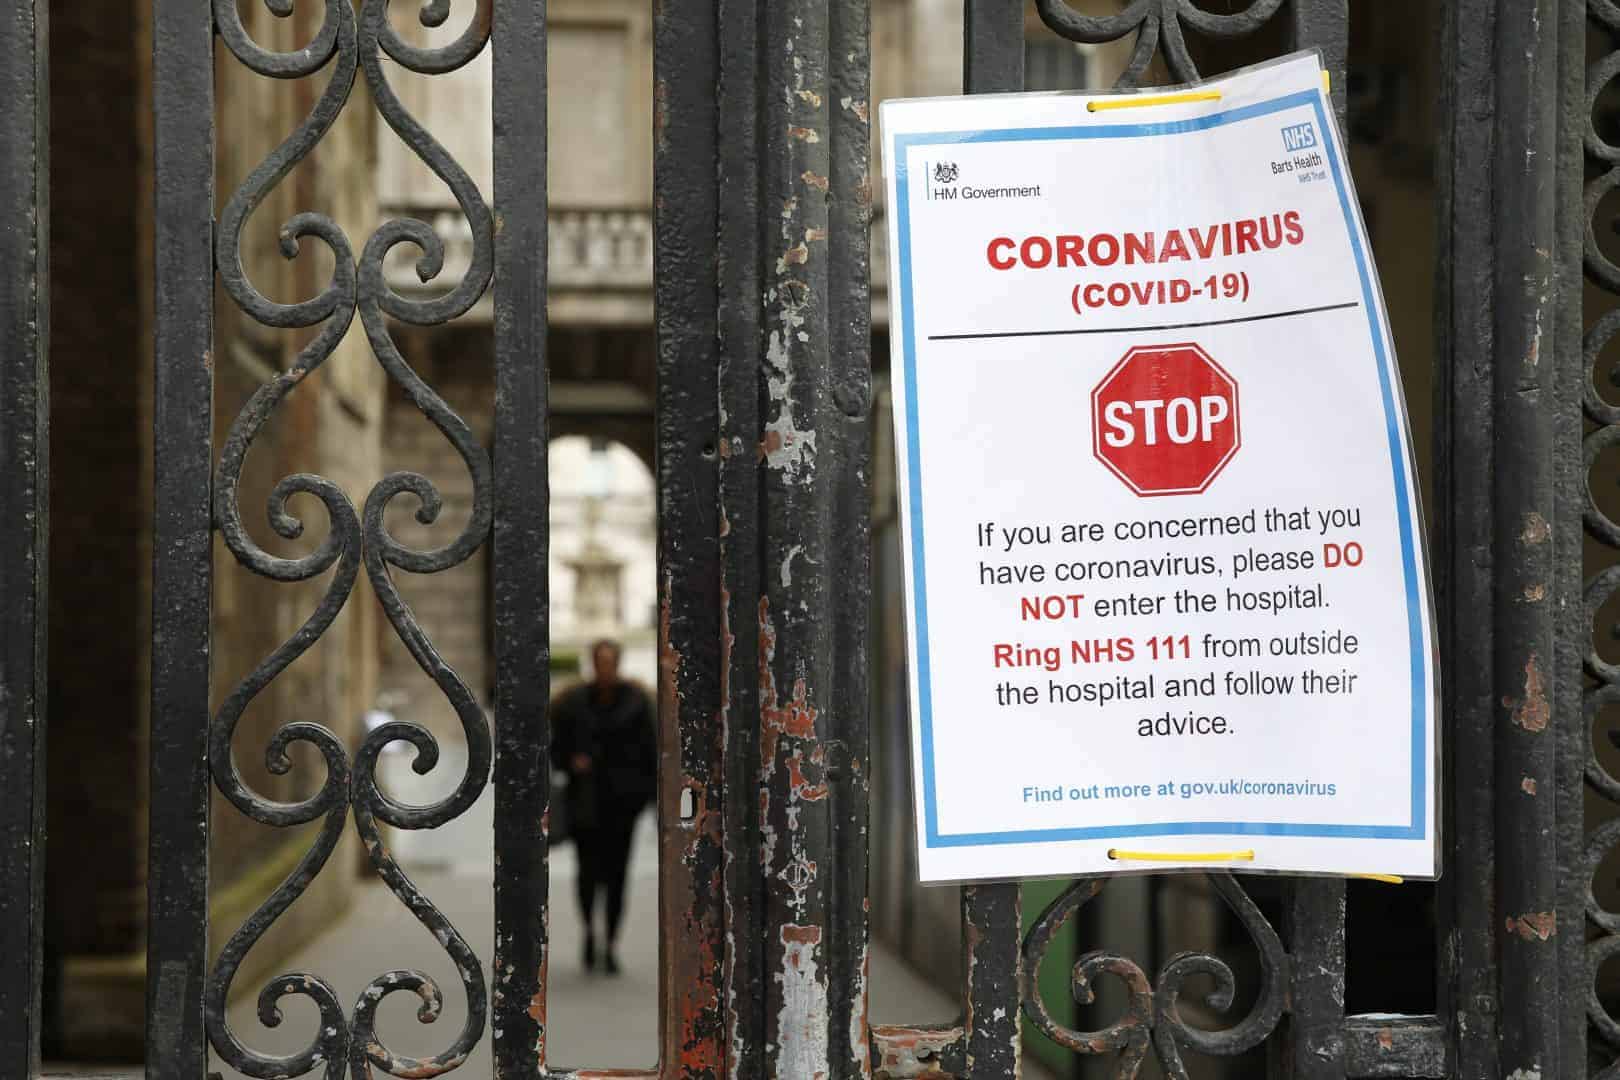 Coronavirus UK: New income protection insurance policies ‘halted or amended’